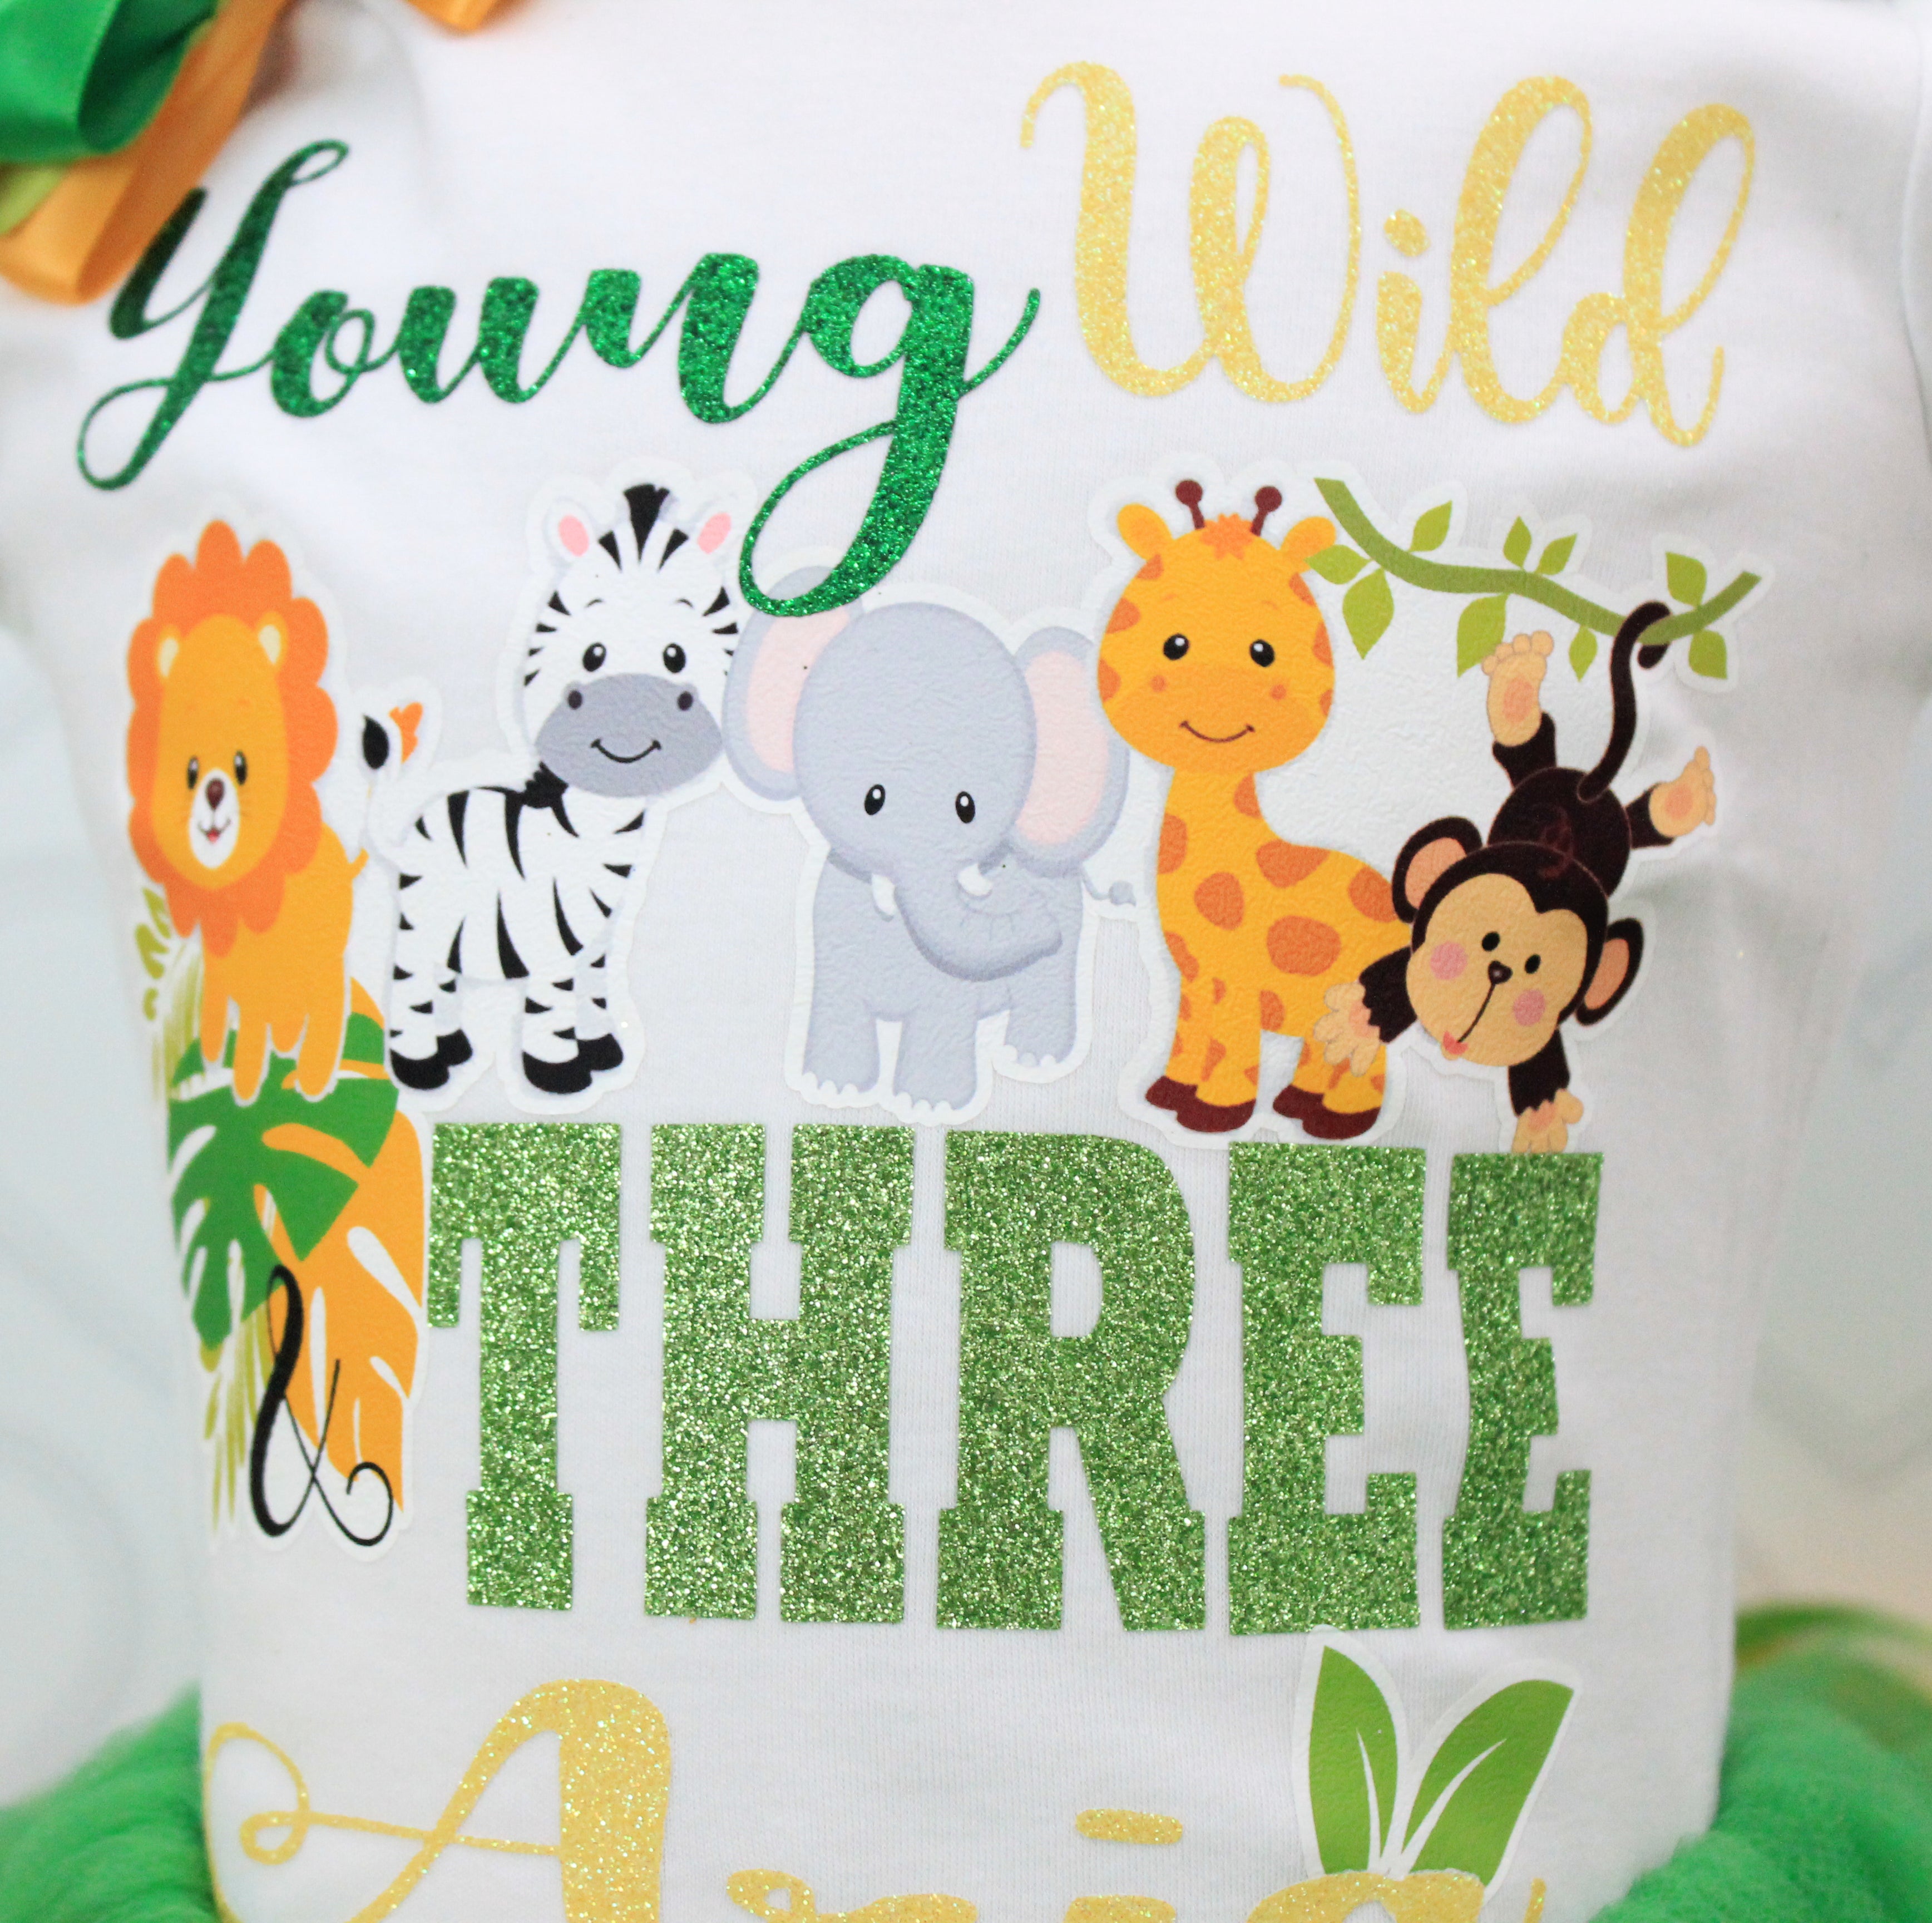 Young Wild & Three tutu set-Young Wild & Three outfit-Young Wild & Three dress-Young Wild & Three Birthday outfit